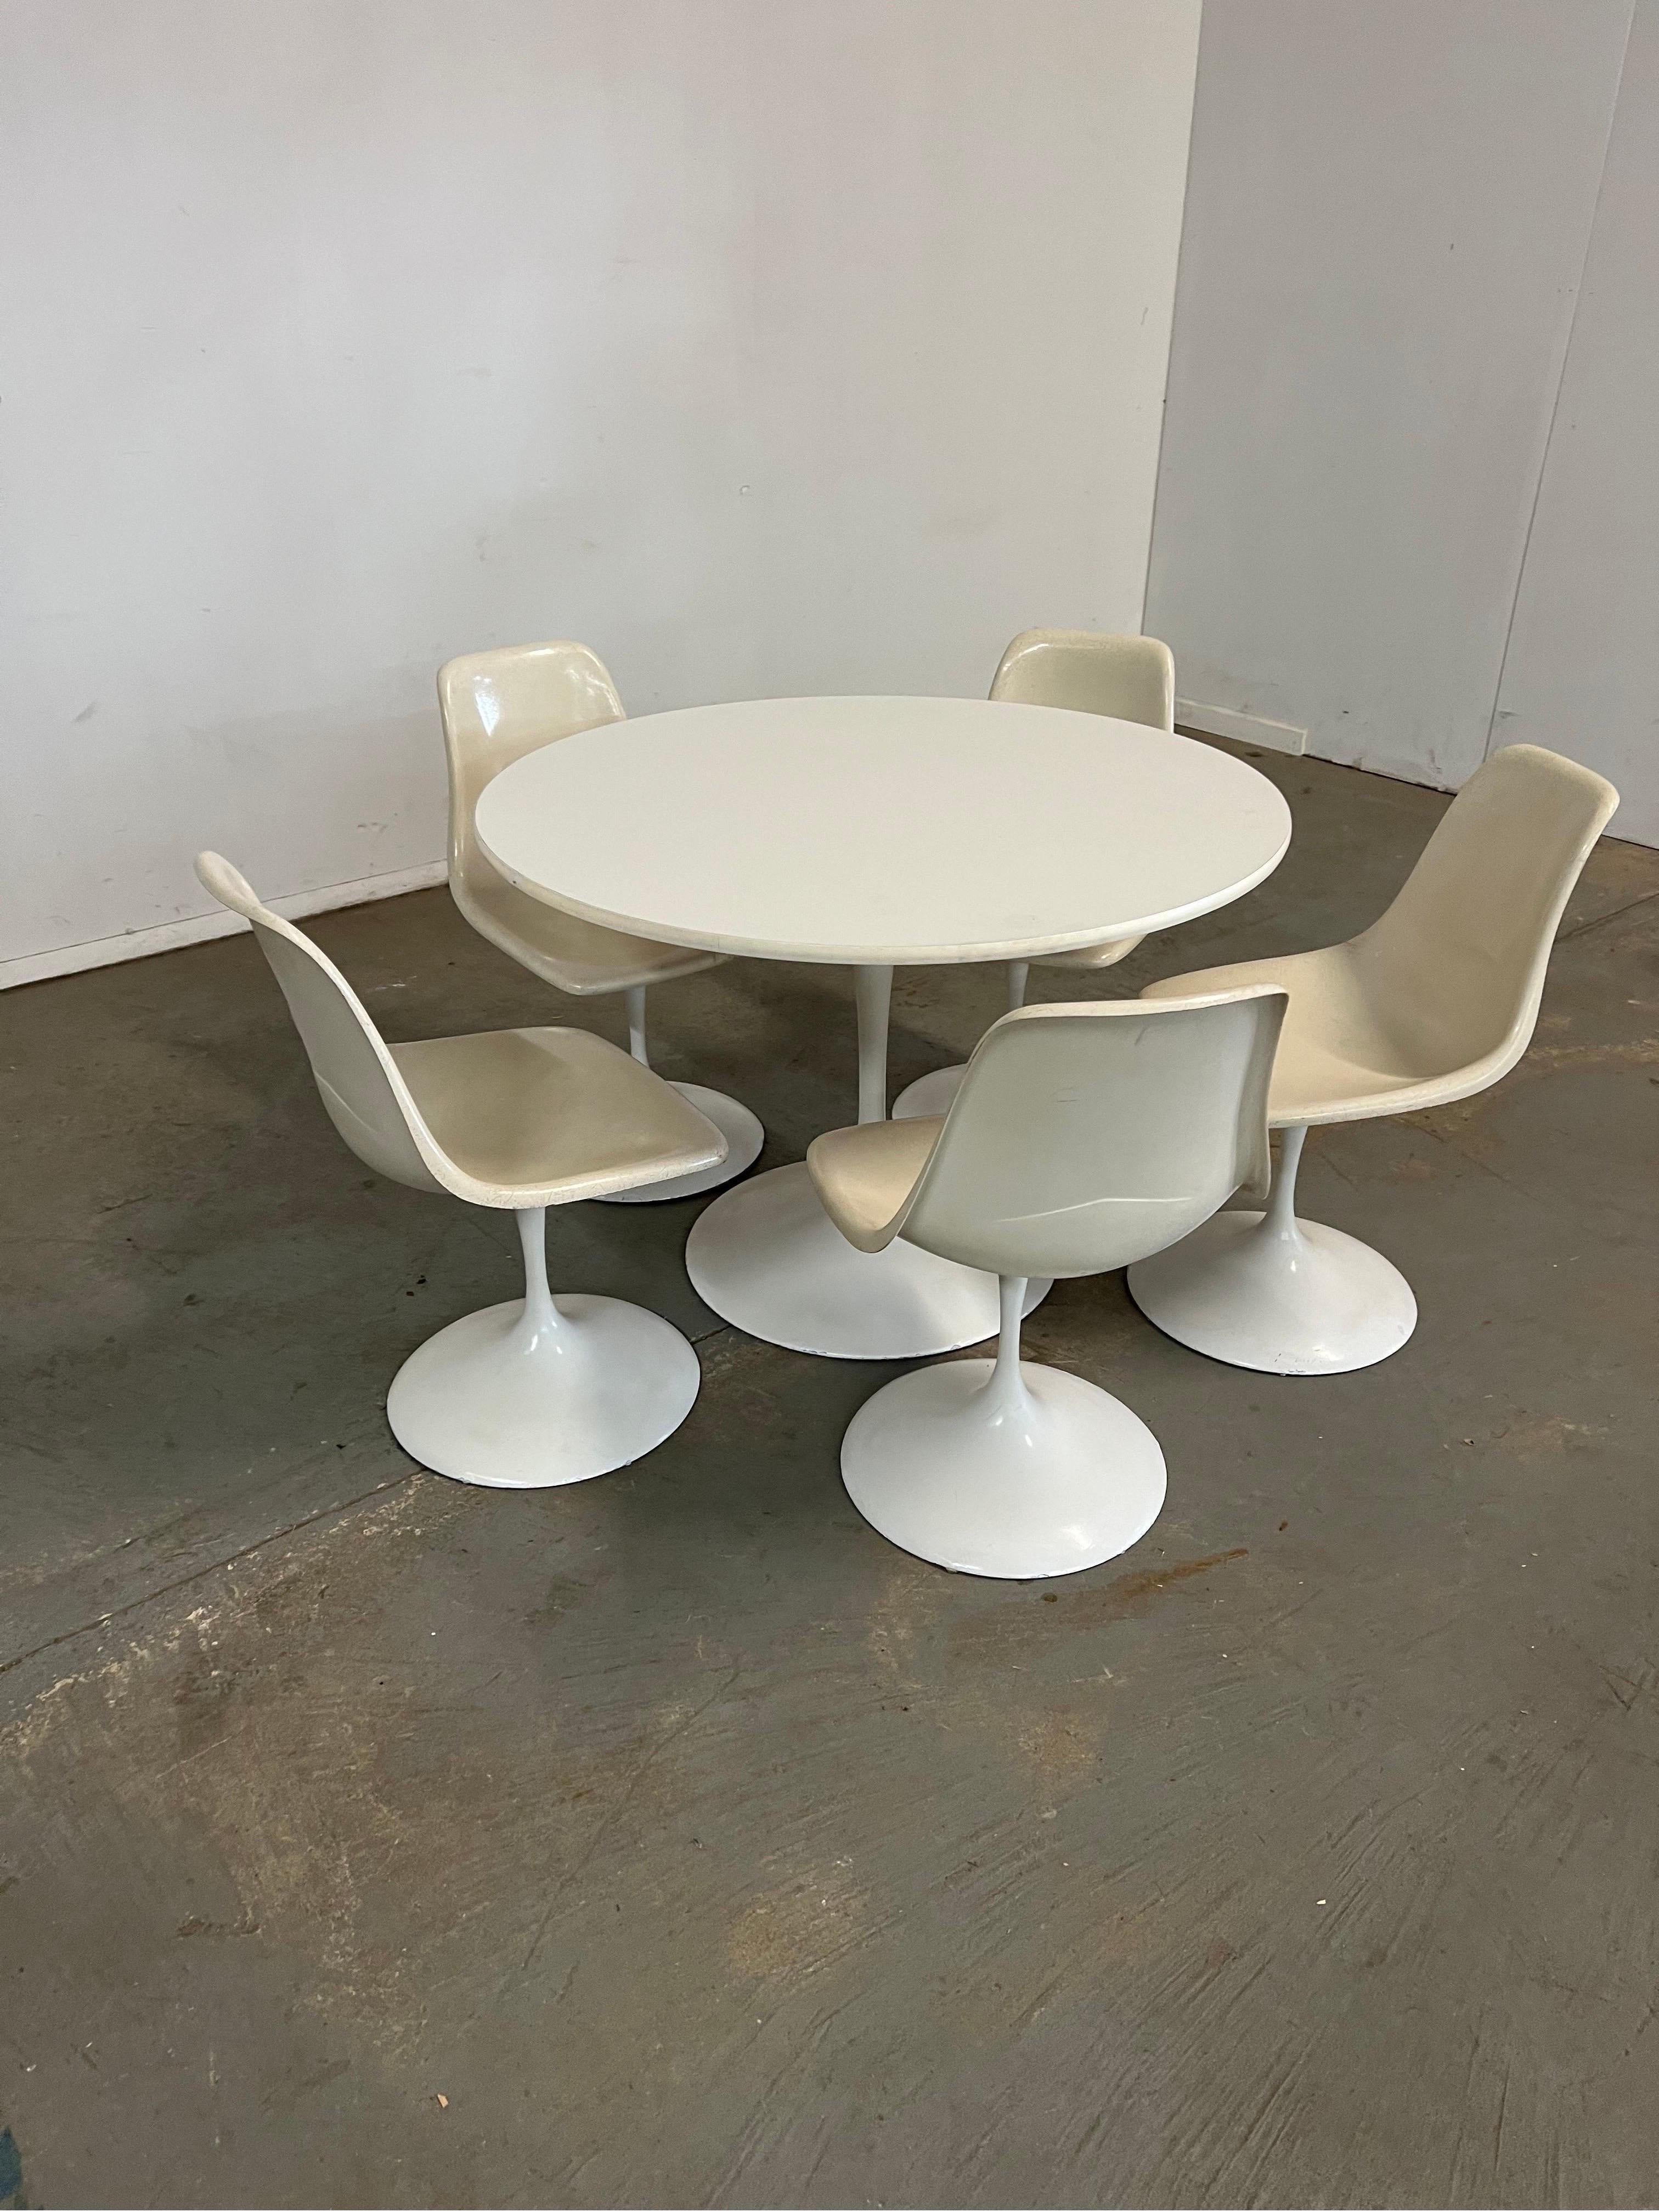 Mid-Century Modern Eero Saarinen Style Tulip Round Dining Table and Chairs
Offered is a 6 piece dining set, similar to the style of Eero Saarinen. This set is highly versitile and is great for small spaces. The set gives off the 